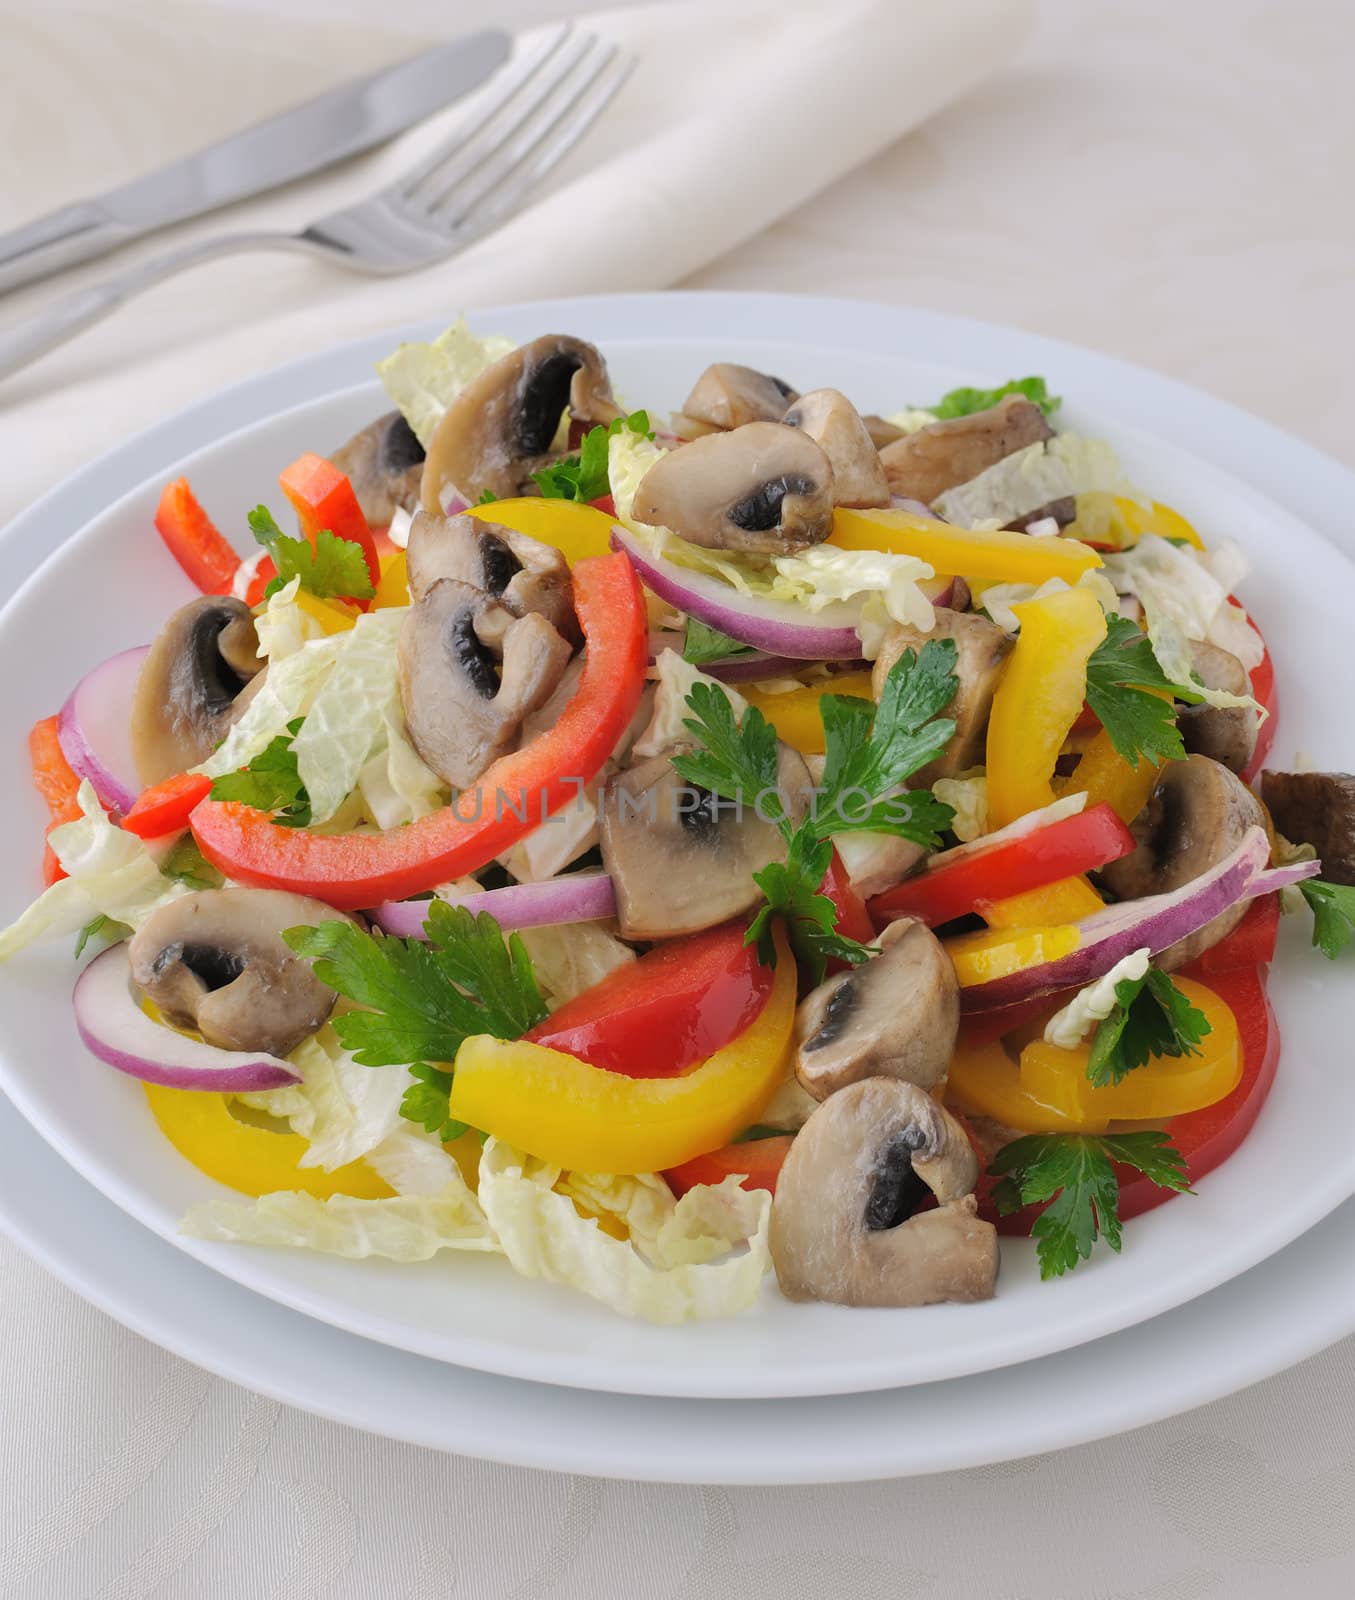 Salad of cabbage with mushrooms and peppers